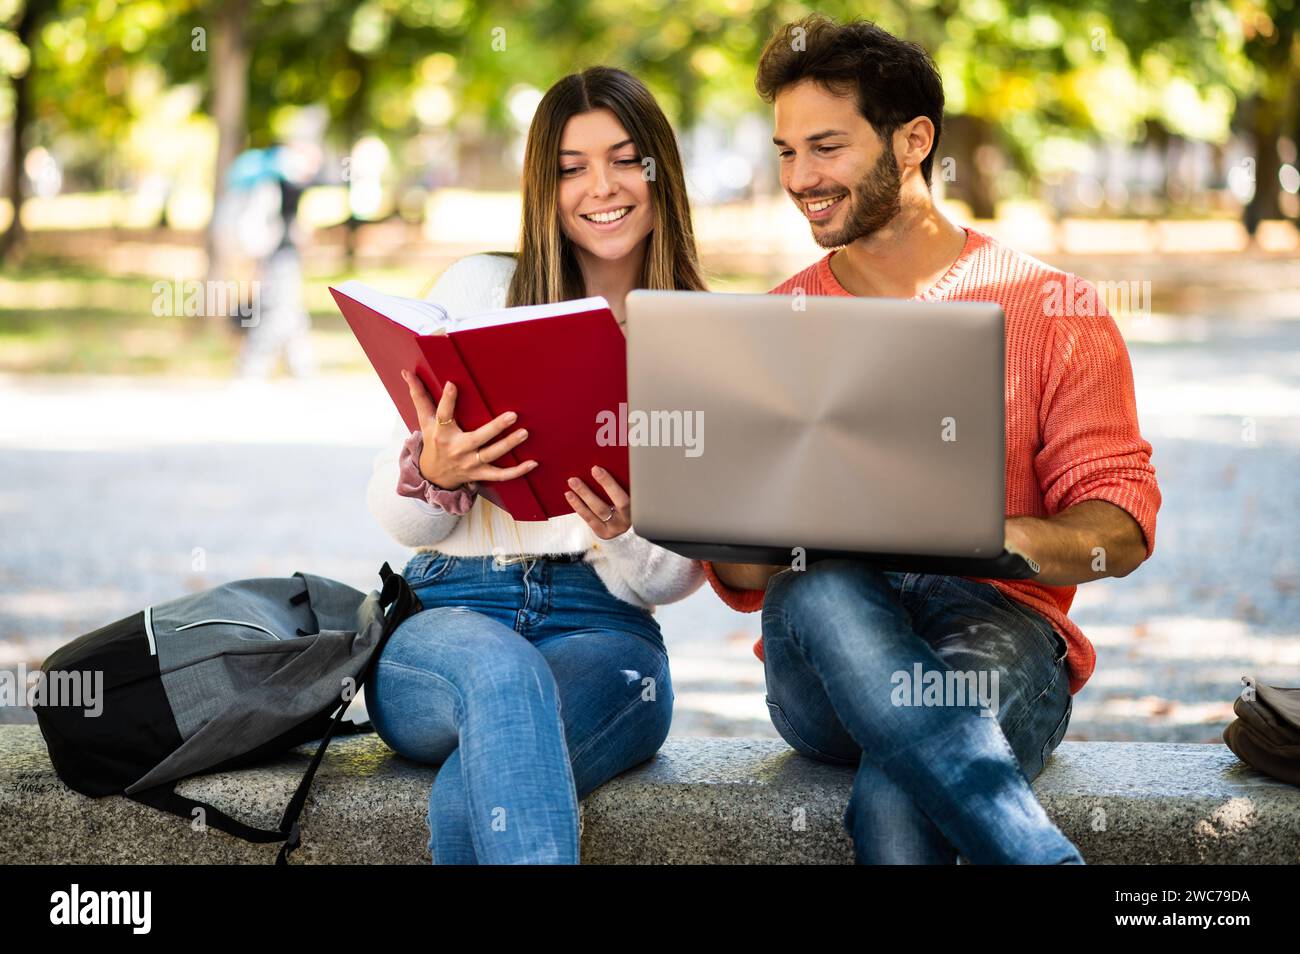 Two students studying together sitting on a bench outdoor Stock Photo